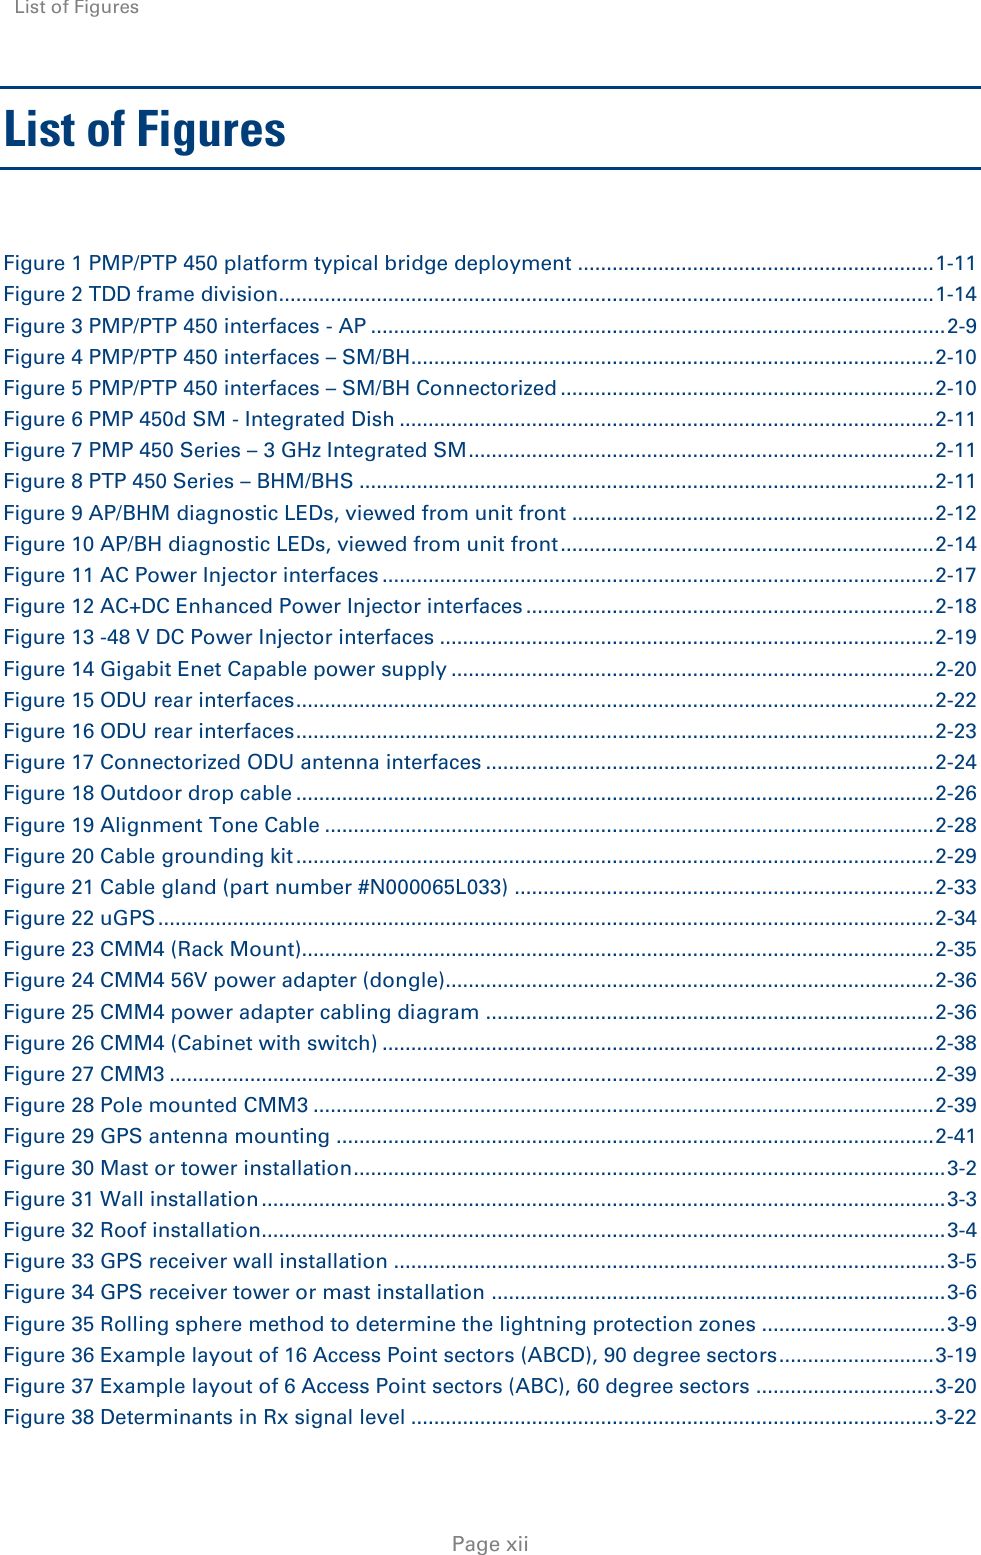 List of Figures    Page xii List of Figures  Figure 1 PMP/PTP 450 platform typical bridge deployment .............................................................. 1-11 Figure 2 TDD frame division.................................................................................................................. 1-14 Figure 3 PMP/PTP 450 interfaces - AP .................................................................................................... 2-9 Figure 4 PMP/PTP 450 interfaces – SM/BH ........................................................................................... 2-10 Figure 5 PMP/PTP 450 interfaces – SM/BH Connectorized ................................................................. 2-10 Figure 6 PMP 450d SM - Integrated Dish ............................................................................................. 2-11 Figure 7 PMP 450 Series – 3 GHz Integrated SM ................................................................................. 2-11 Figure 8 PTP 450 Series – BHM/BHS .................................................................................................... 2-11 Figure 9 AP/BHM diagnostic LEDs, viewed from unit front ............................................................... 2-12 Figure 10 AP/BH diagnostic LEDs, viewed from unit front ................................................................. 2-14 Figure 11 AC Power Injector interfaces ................................................................................................ 2-17 Figure 12 AC+DC Enhanced Power Injector interfaces ....................................................................... 2-18 Figure 13 -48 V DC Power Injector interfaces ...................................................................................... 2-19 Figure 14 Gigabit Enet Capable power supply .................................................................................... 2-20 Figure 15 ODU rear interfaces ............................................................................................................... 2-22 Figure 16 ODU rear interfaces ............................................................................................................... 2-23 Figure 17 Connectorized ODU antenna interfaces .............................................................................. 2-24 Figure 18 Outdoor drop cable ............................................................................................................... 2-26 Figure 19 Alignment Tone Cable .......................................................................................................... 2-28 Figure 20 Cable grounding kit ............................................................................................................... 2-29 Figure 21 Cable gland (part number #N000065L033) ......................................................................... 2-33 Figure 22 uGPS ....................................................................................................................................... 2-34 Figure 23 CMM4 (Rack Mount).............................................................................................................. 2-35 Figure 24 CMM4 56V power adapter (dongle)..................................................................................... 2-36 Figure 25 CMM4 power adapter cabling diagram .............................................................................. 2-36 Figure 26 CMM4 (Cabinet with switch) ................................................................................................ 2-38 Figure 27 CMM3 ..................................................................................................................................... 2-39 Figure 28 Pole mounted CMM3 ............................................................................................................ 2-39 Figure 29 GPS antenna mounting ........................................................................................................ 2-41 Figure 30 Mast or tower installation ....................................................................................................... 3-2 Figure 31 Wall installation ....................................................................................................................... 3-3 Figure 32 Roof installation....................................................................................................................... 3-4 Figure 33 GPS receiver wall installation ................................................................................................ 3-5 Figure 34 GPS receiver tower or mast installation ............................................................................... 3-6 Figure 35 Rolling sphere method to determine the lightning protection zones ................................ 3-9 Figure 36 Example layout of 16 Access Point sectors (ABCD), 90 degree sectors ........................... 3-19 Figure 37 Example layout of 6 Access Point sectors (ABC), 60 degree sectors ............................... 3-20 Figure 38 Determinants in Rx signal level ........................................................................................... 3-22 